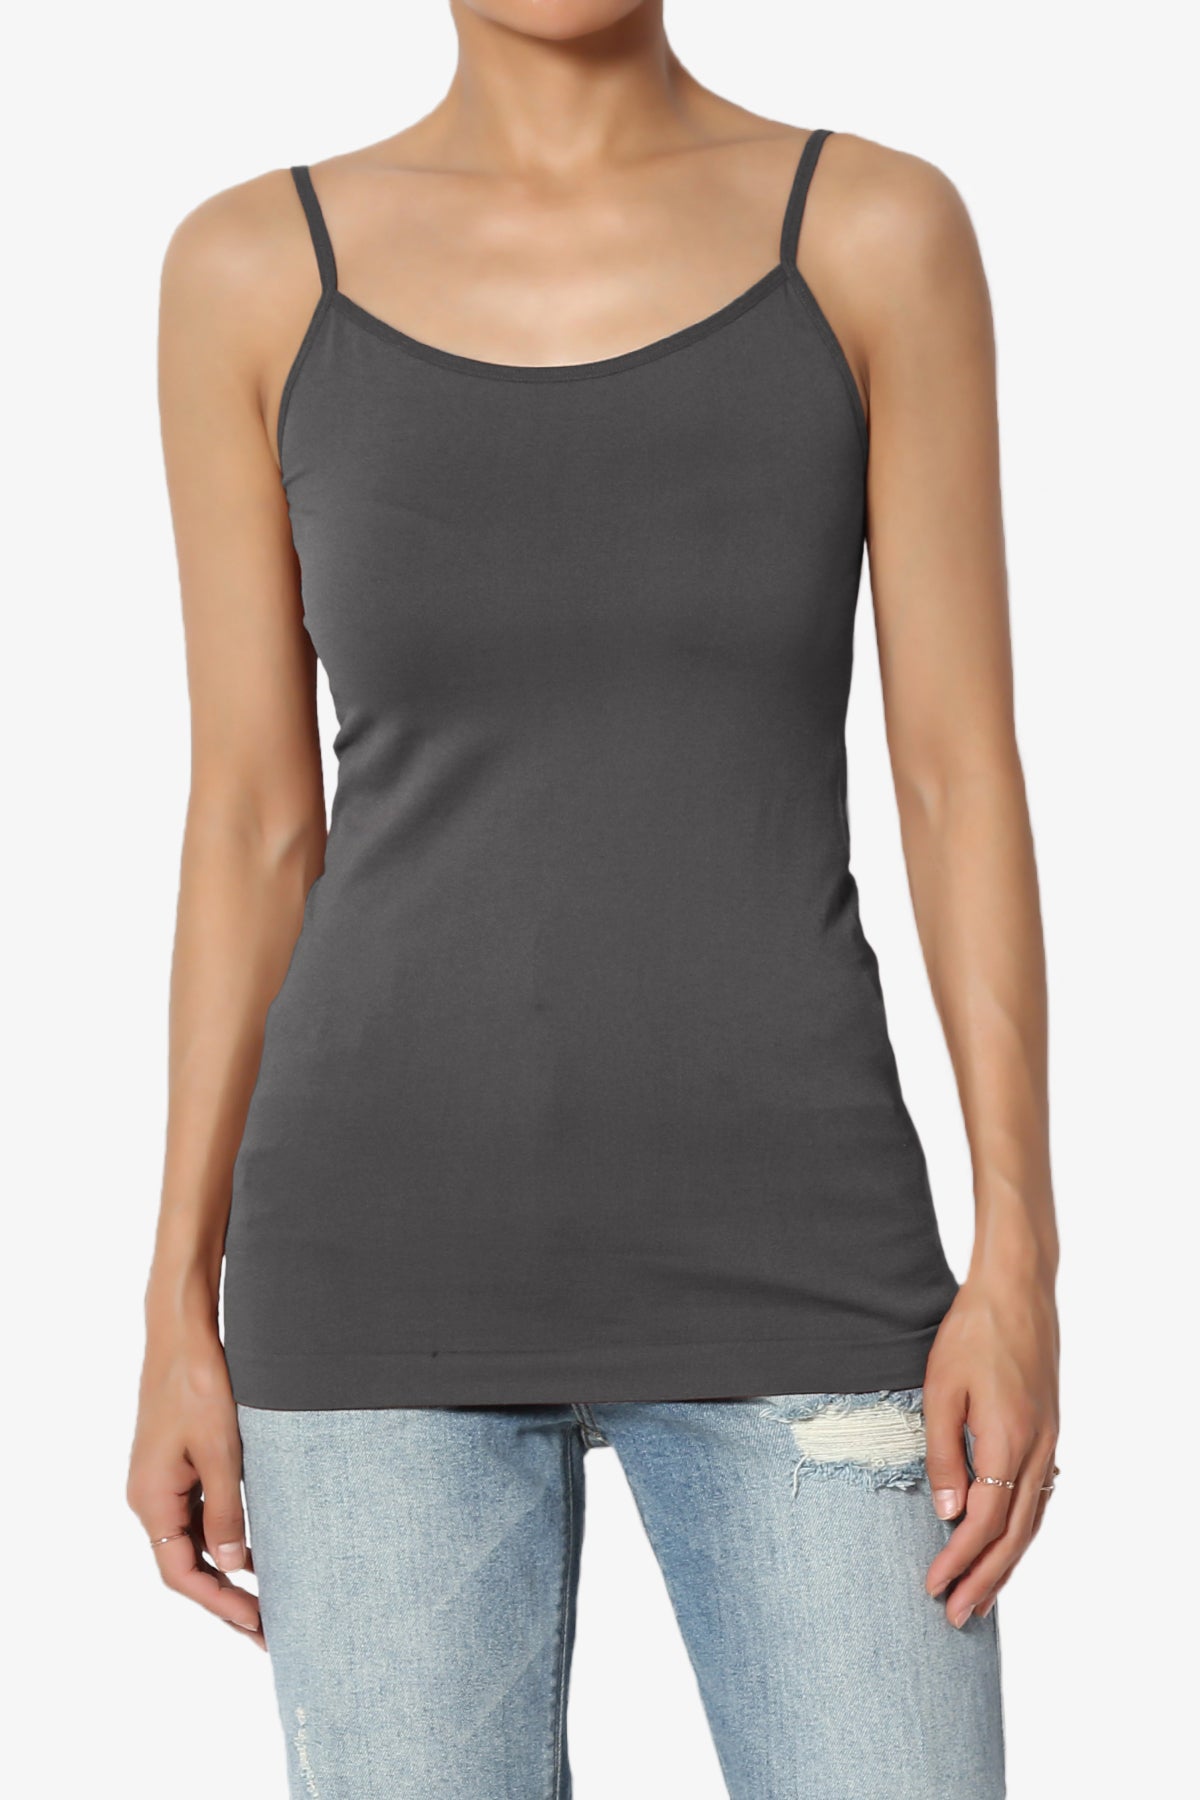 Load image into Gallery viewer, Himari Seamless Camisole Top ASH GREY_1
